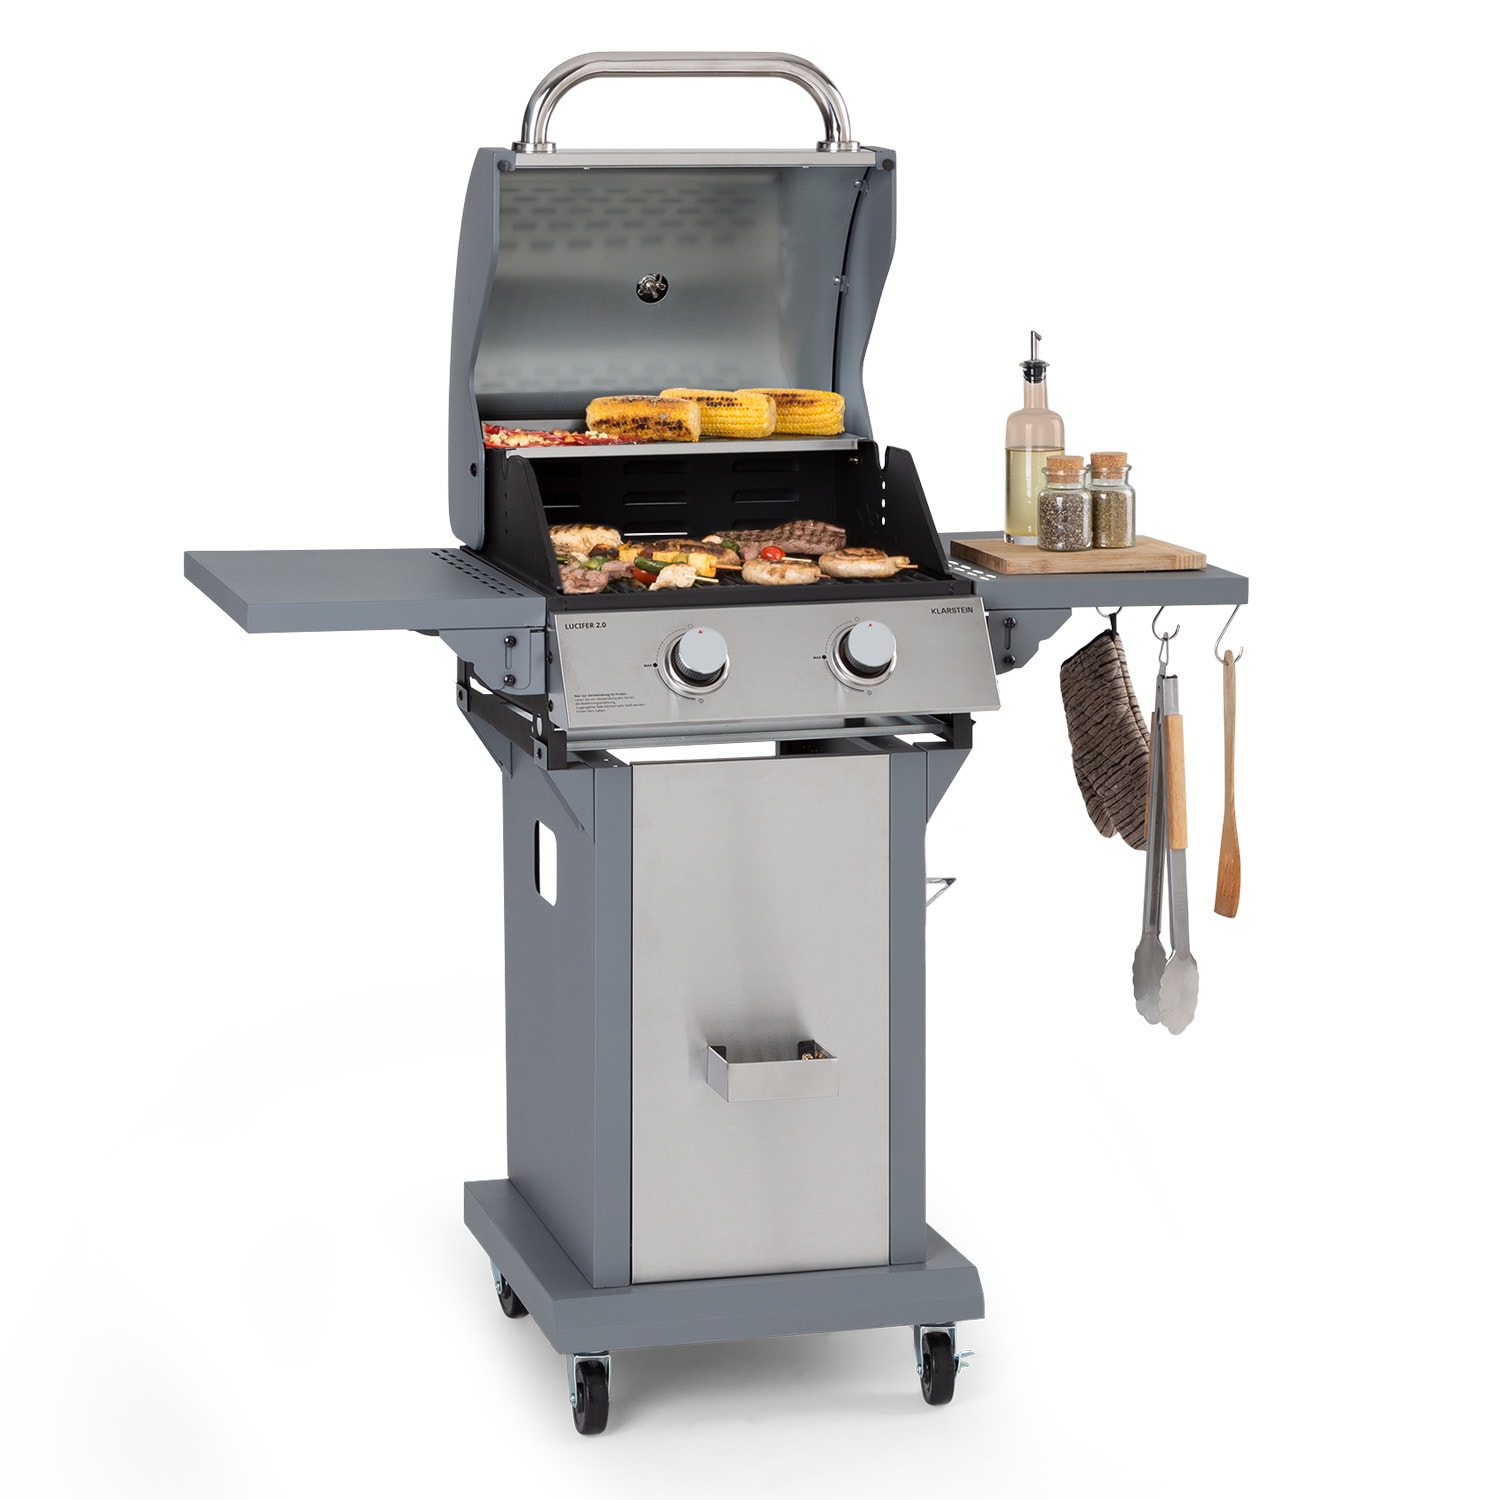 Klarstein Lucifer 2 gas grill 2 x 3.6 kW burners 45 x 45 cm barbecue stainless steel mobile